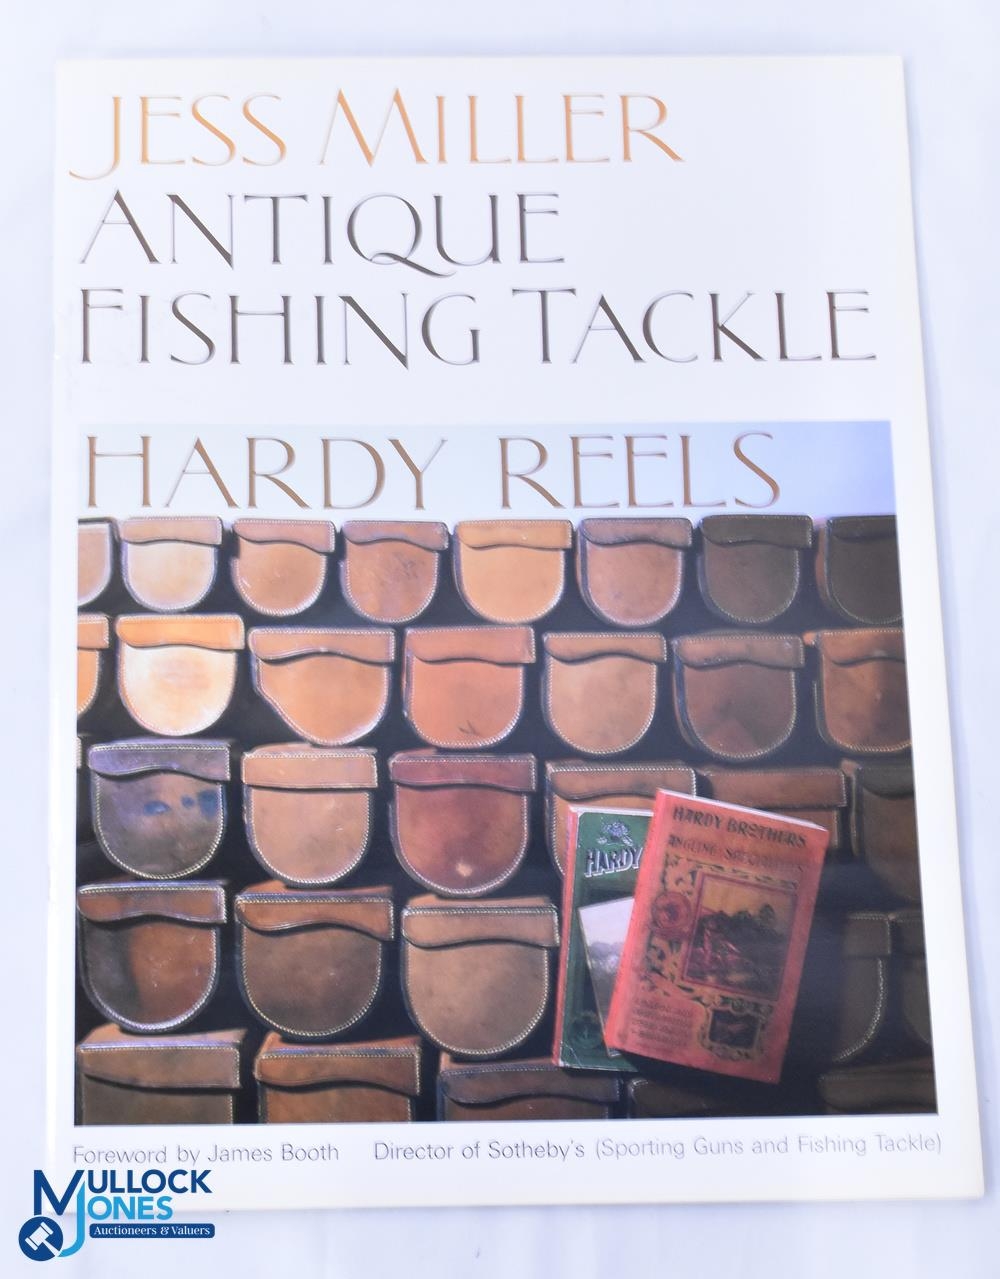 Jess Miller Antique fishing tackle - includes Hardy Lures & Price Guides  catalogue 1987 large folio